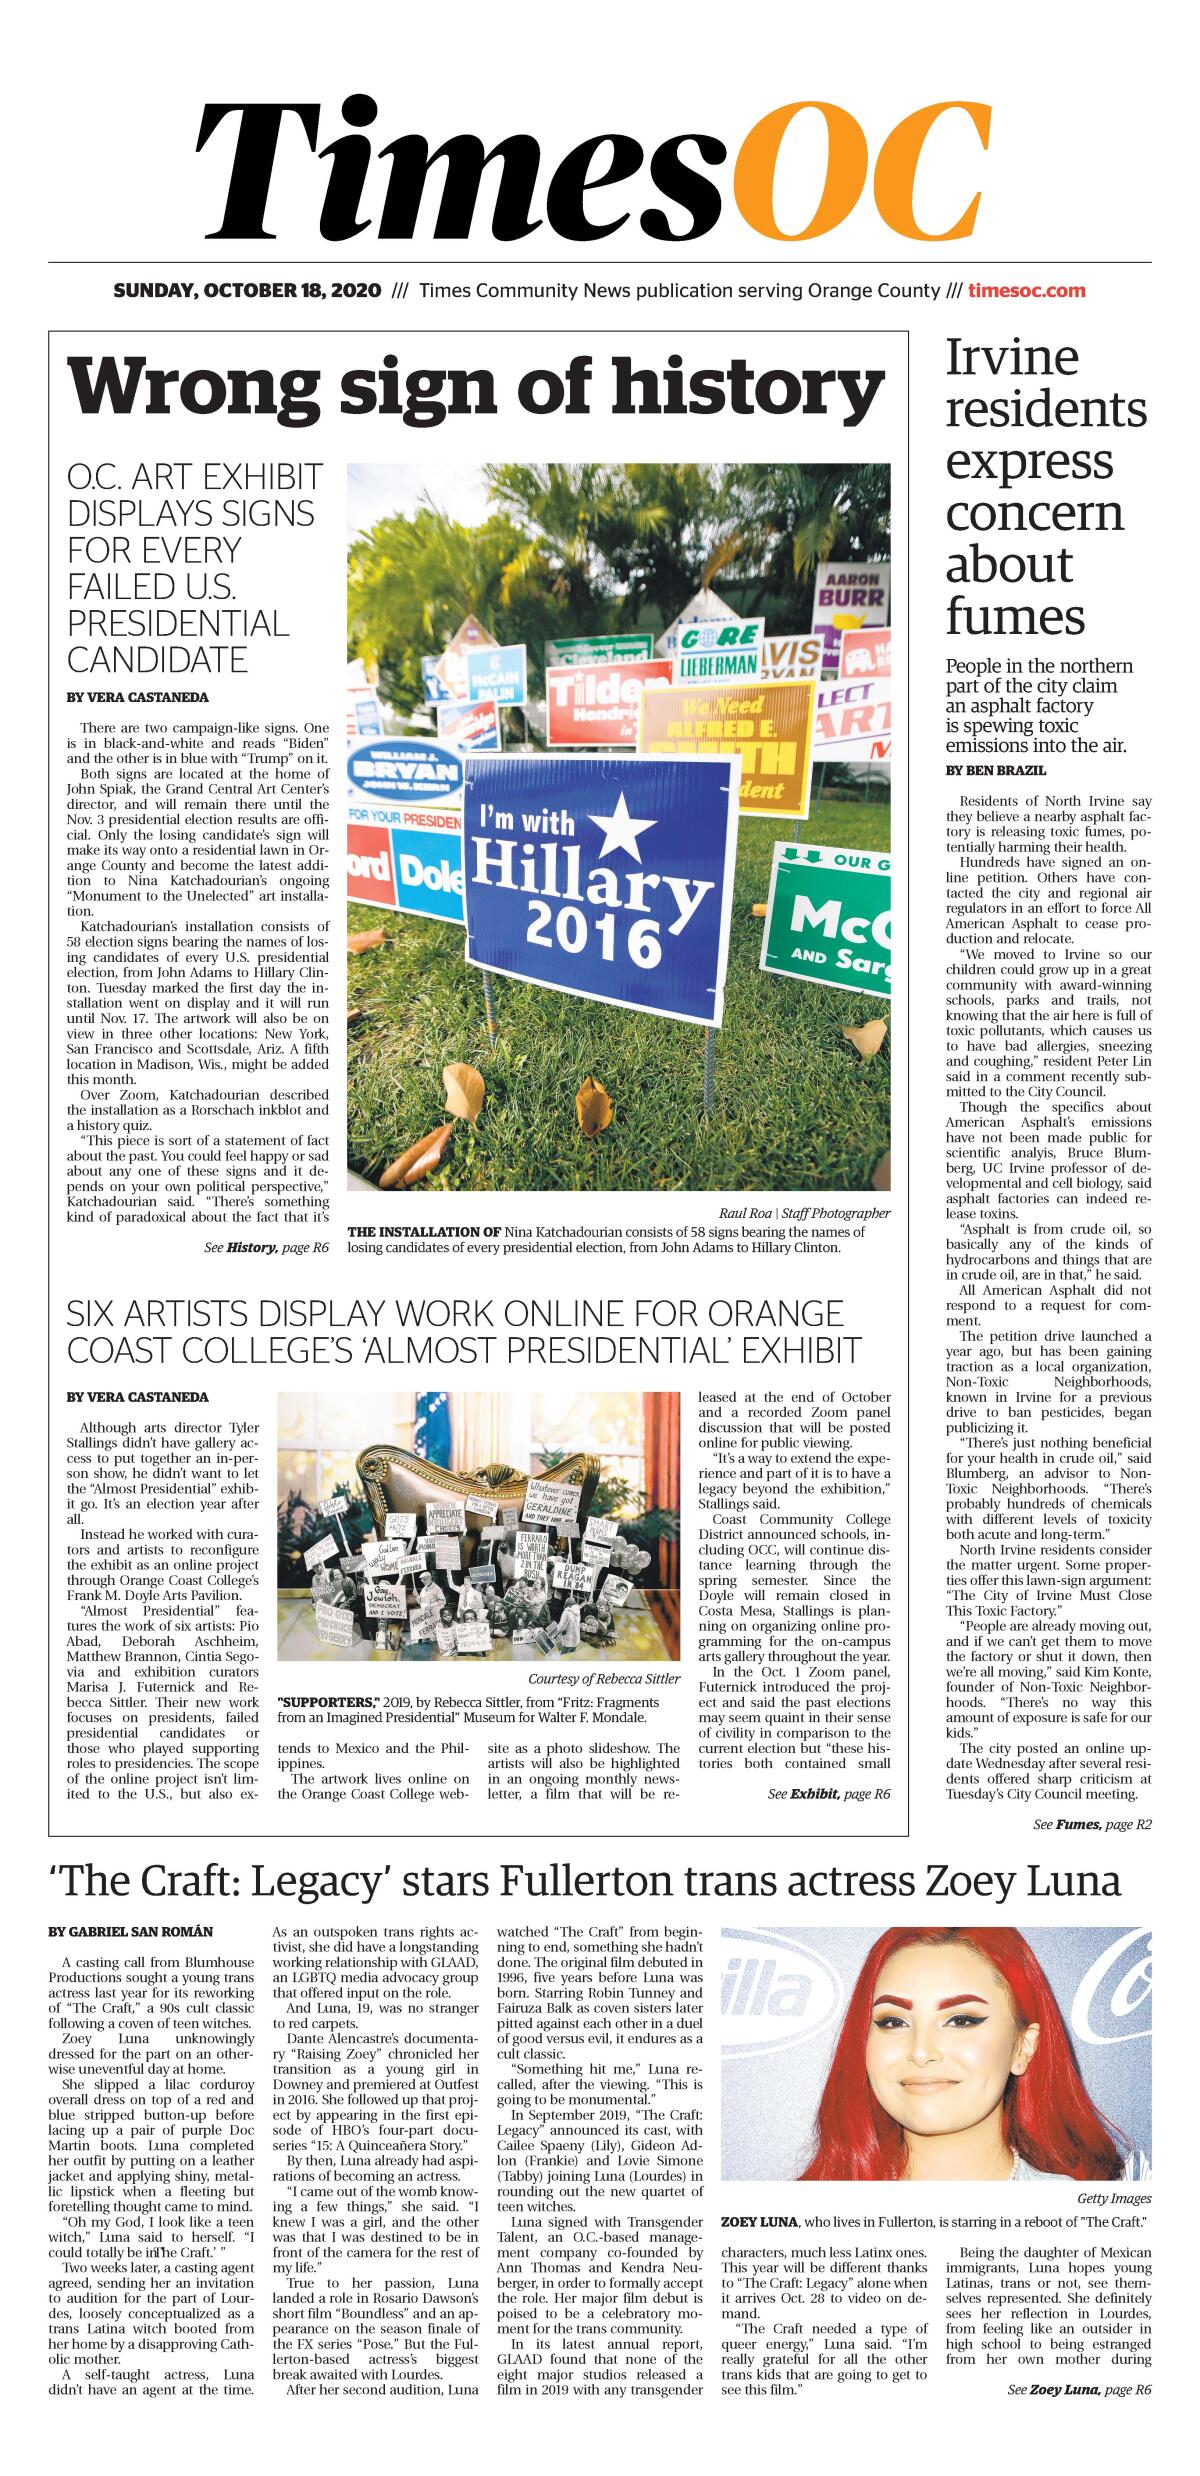 Front page of TimesOC e-newspaper for Sunday, Oct. 18, 2020